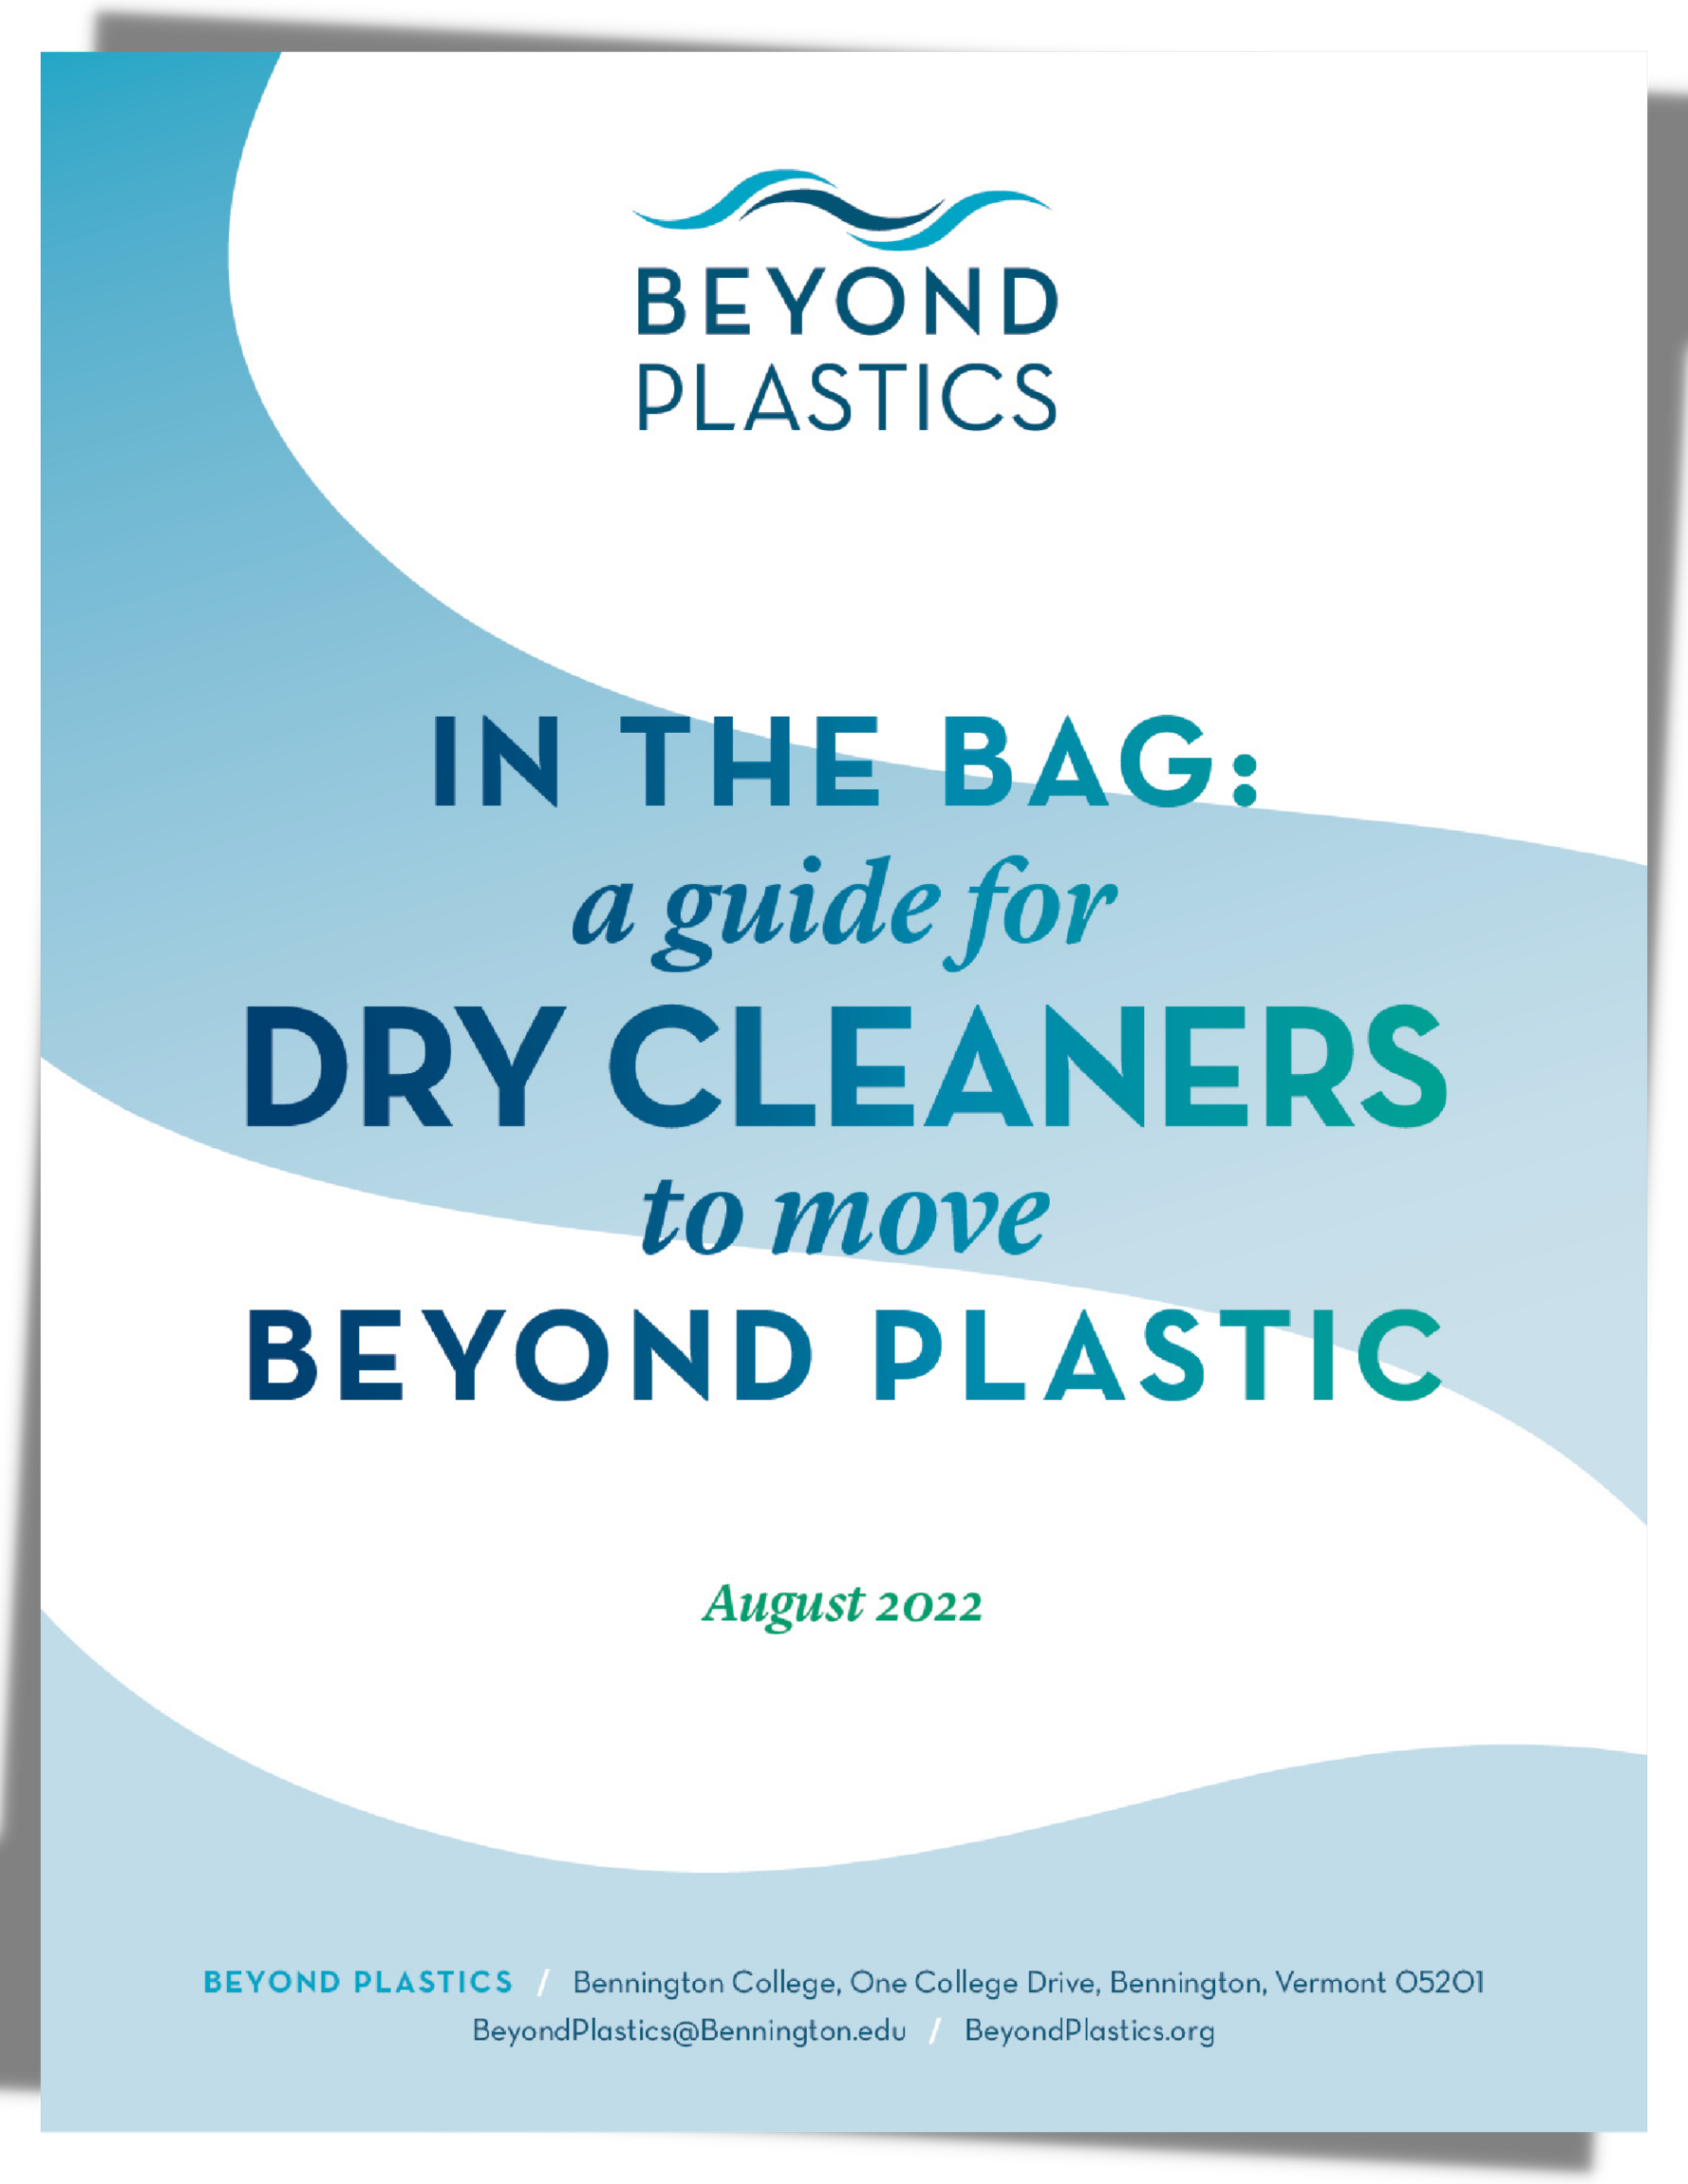 New Beyond Plastics Guide Helps Dry Cleaners Reduce the Use of Plastic